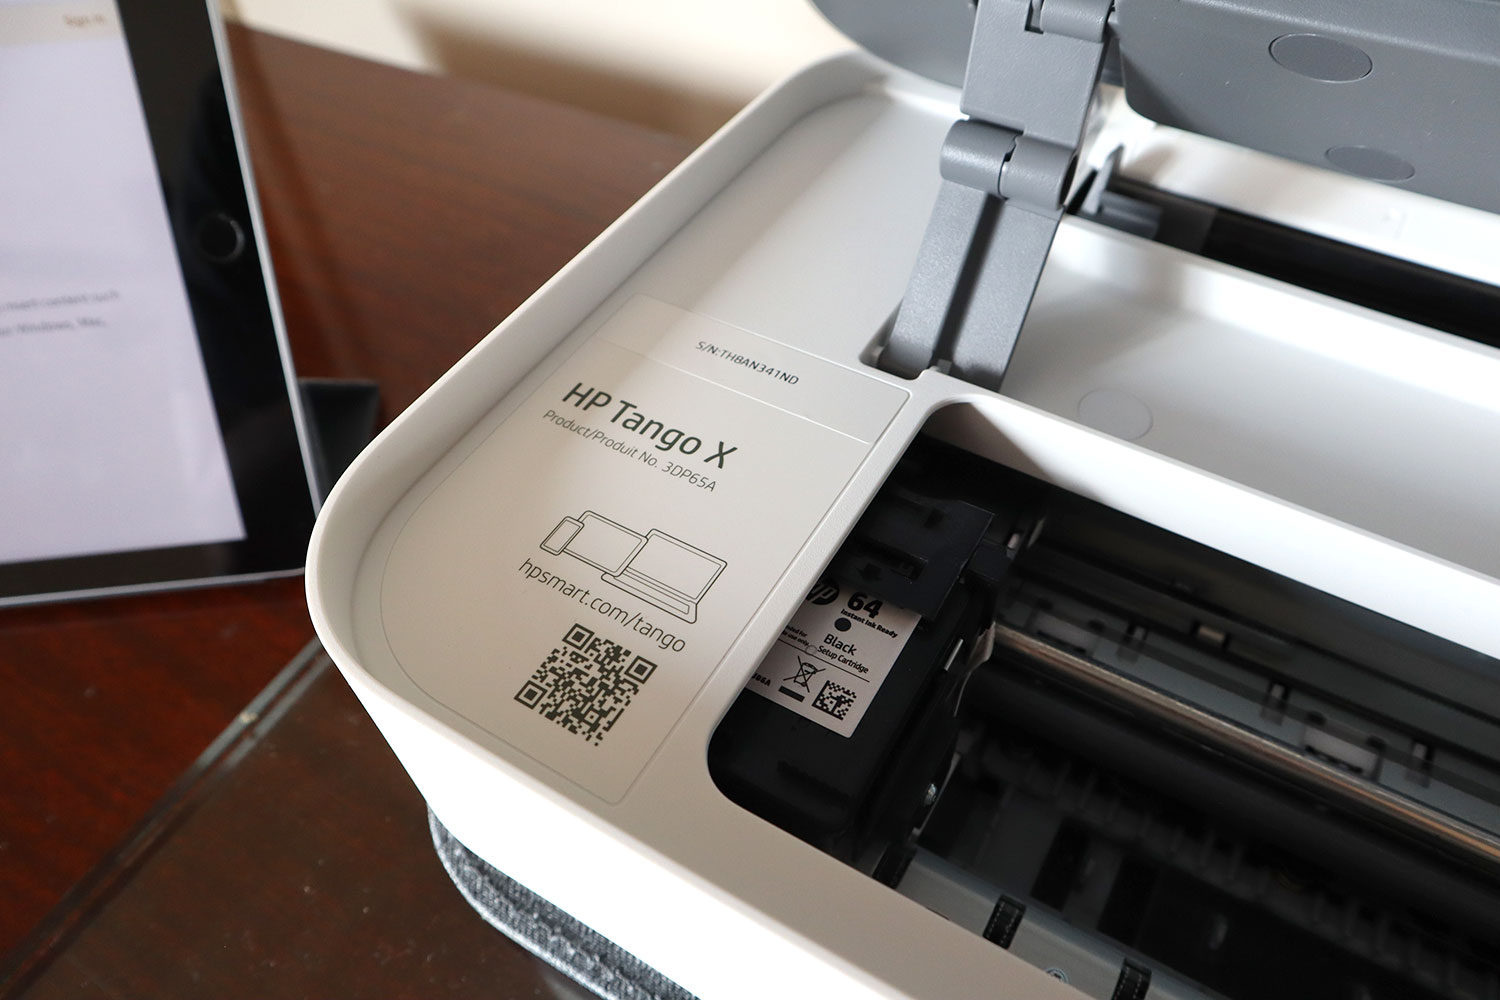 HP Tango X Review | A Printer Fit for the Living | Digital Trends